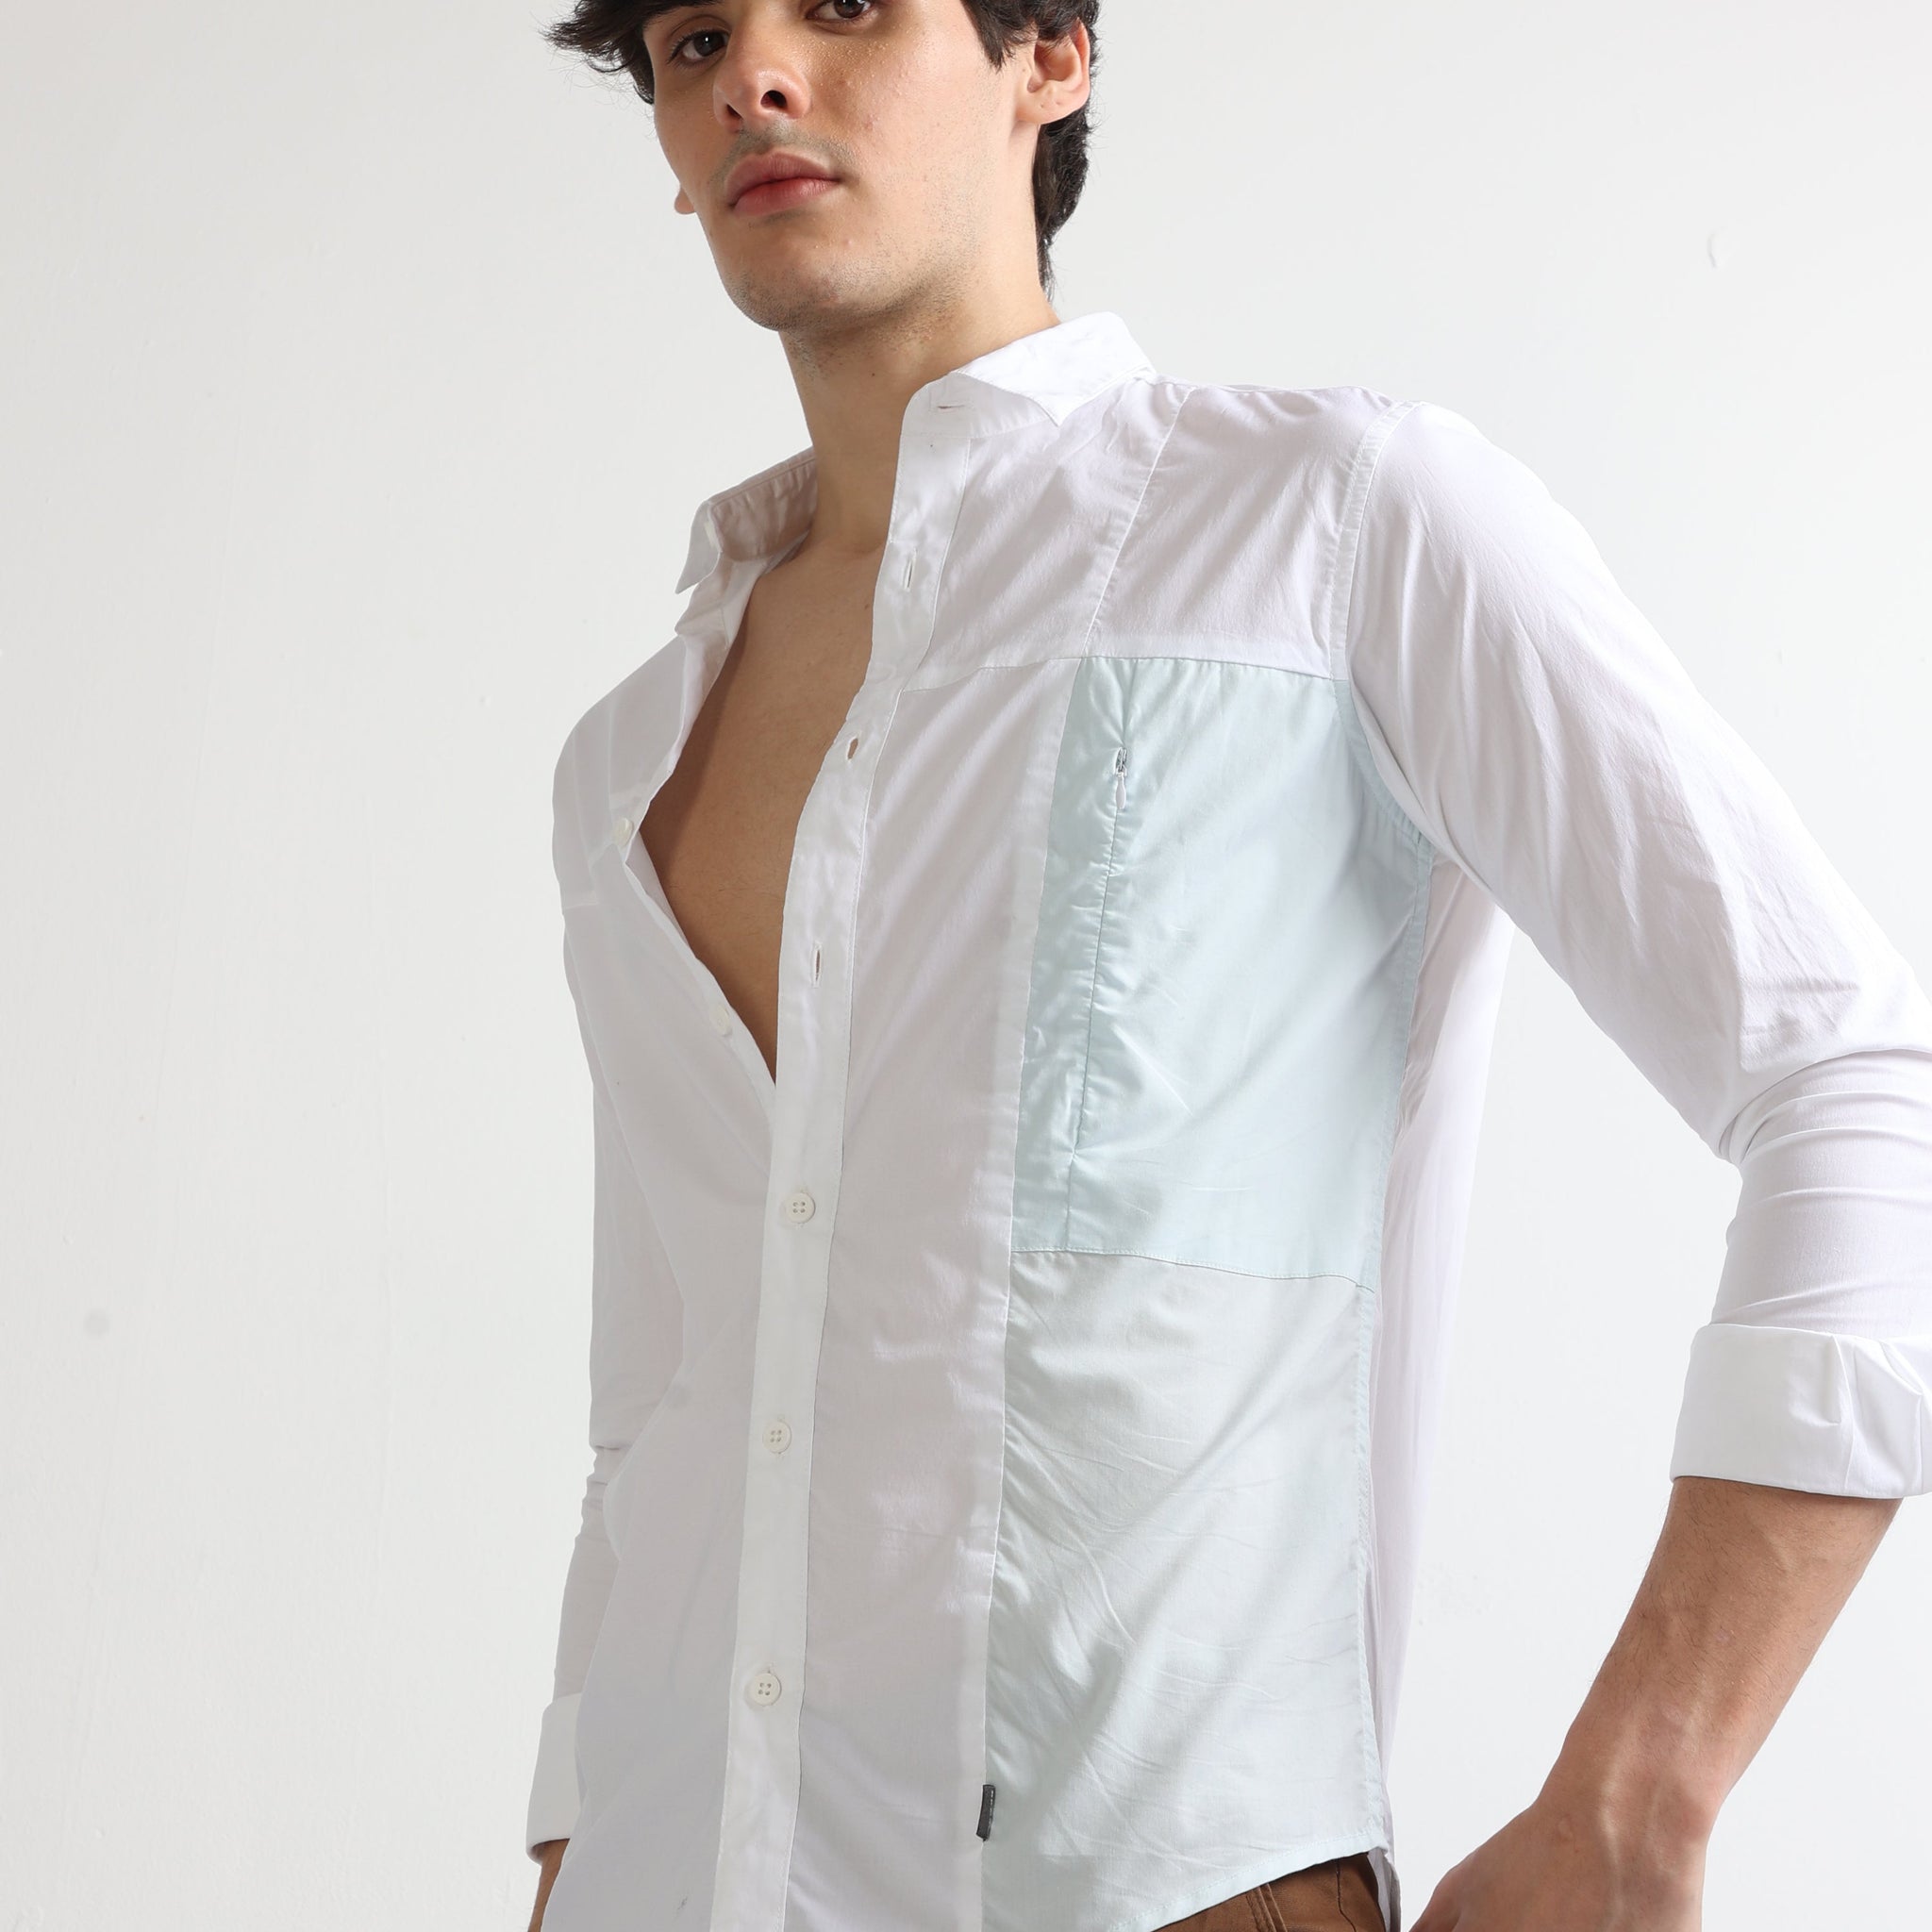 Buy Time Less Side Panel With Stylish Pocket Mens Shirt Online